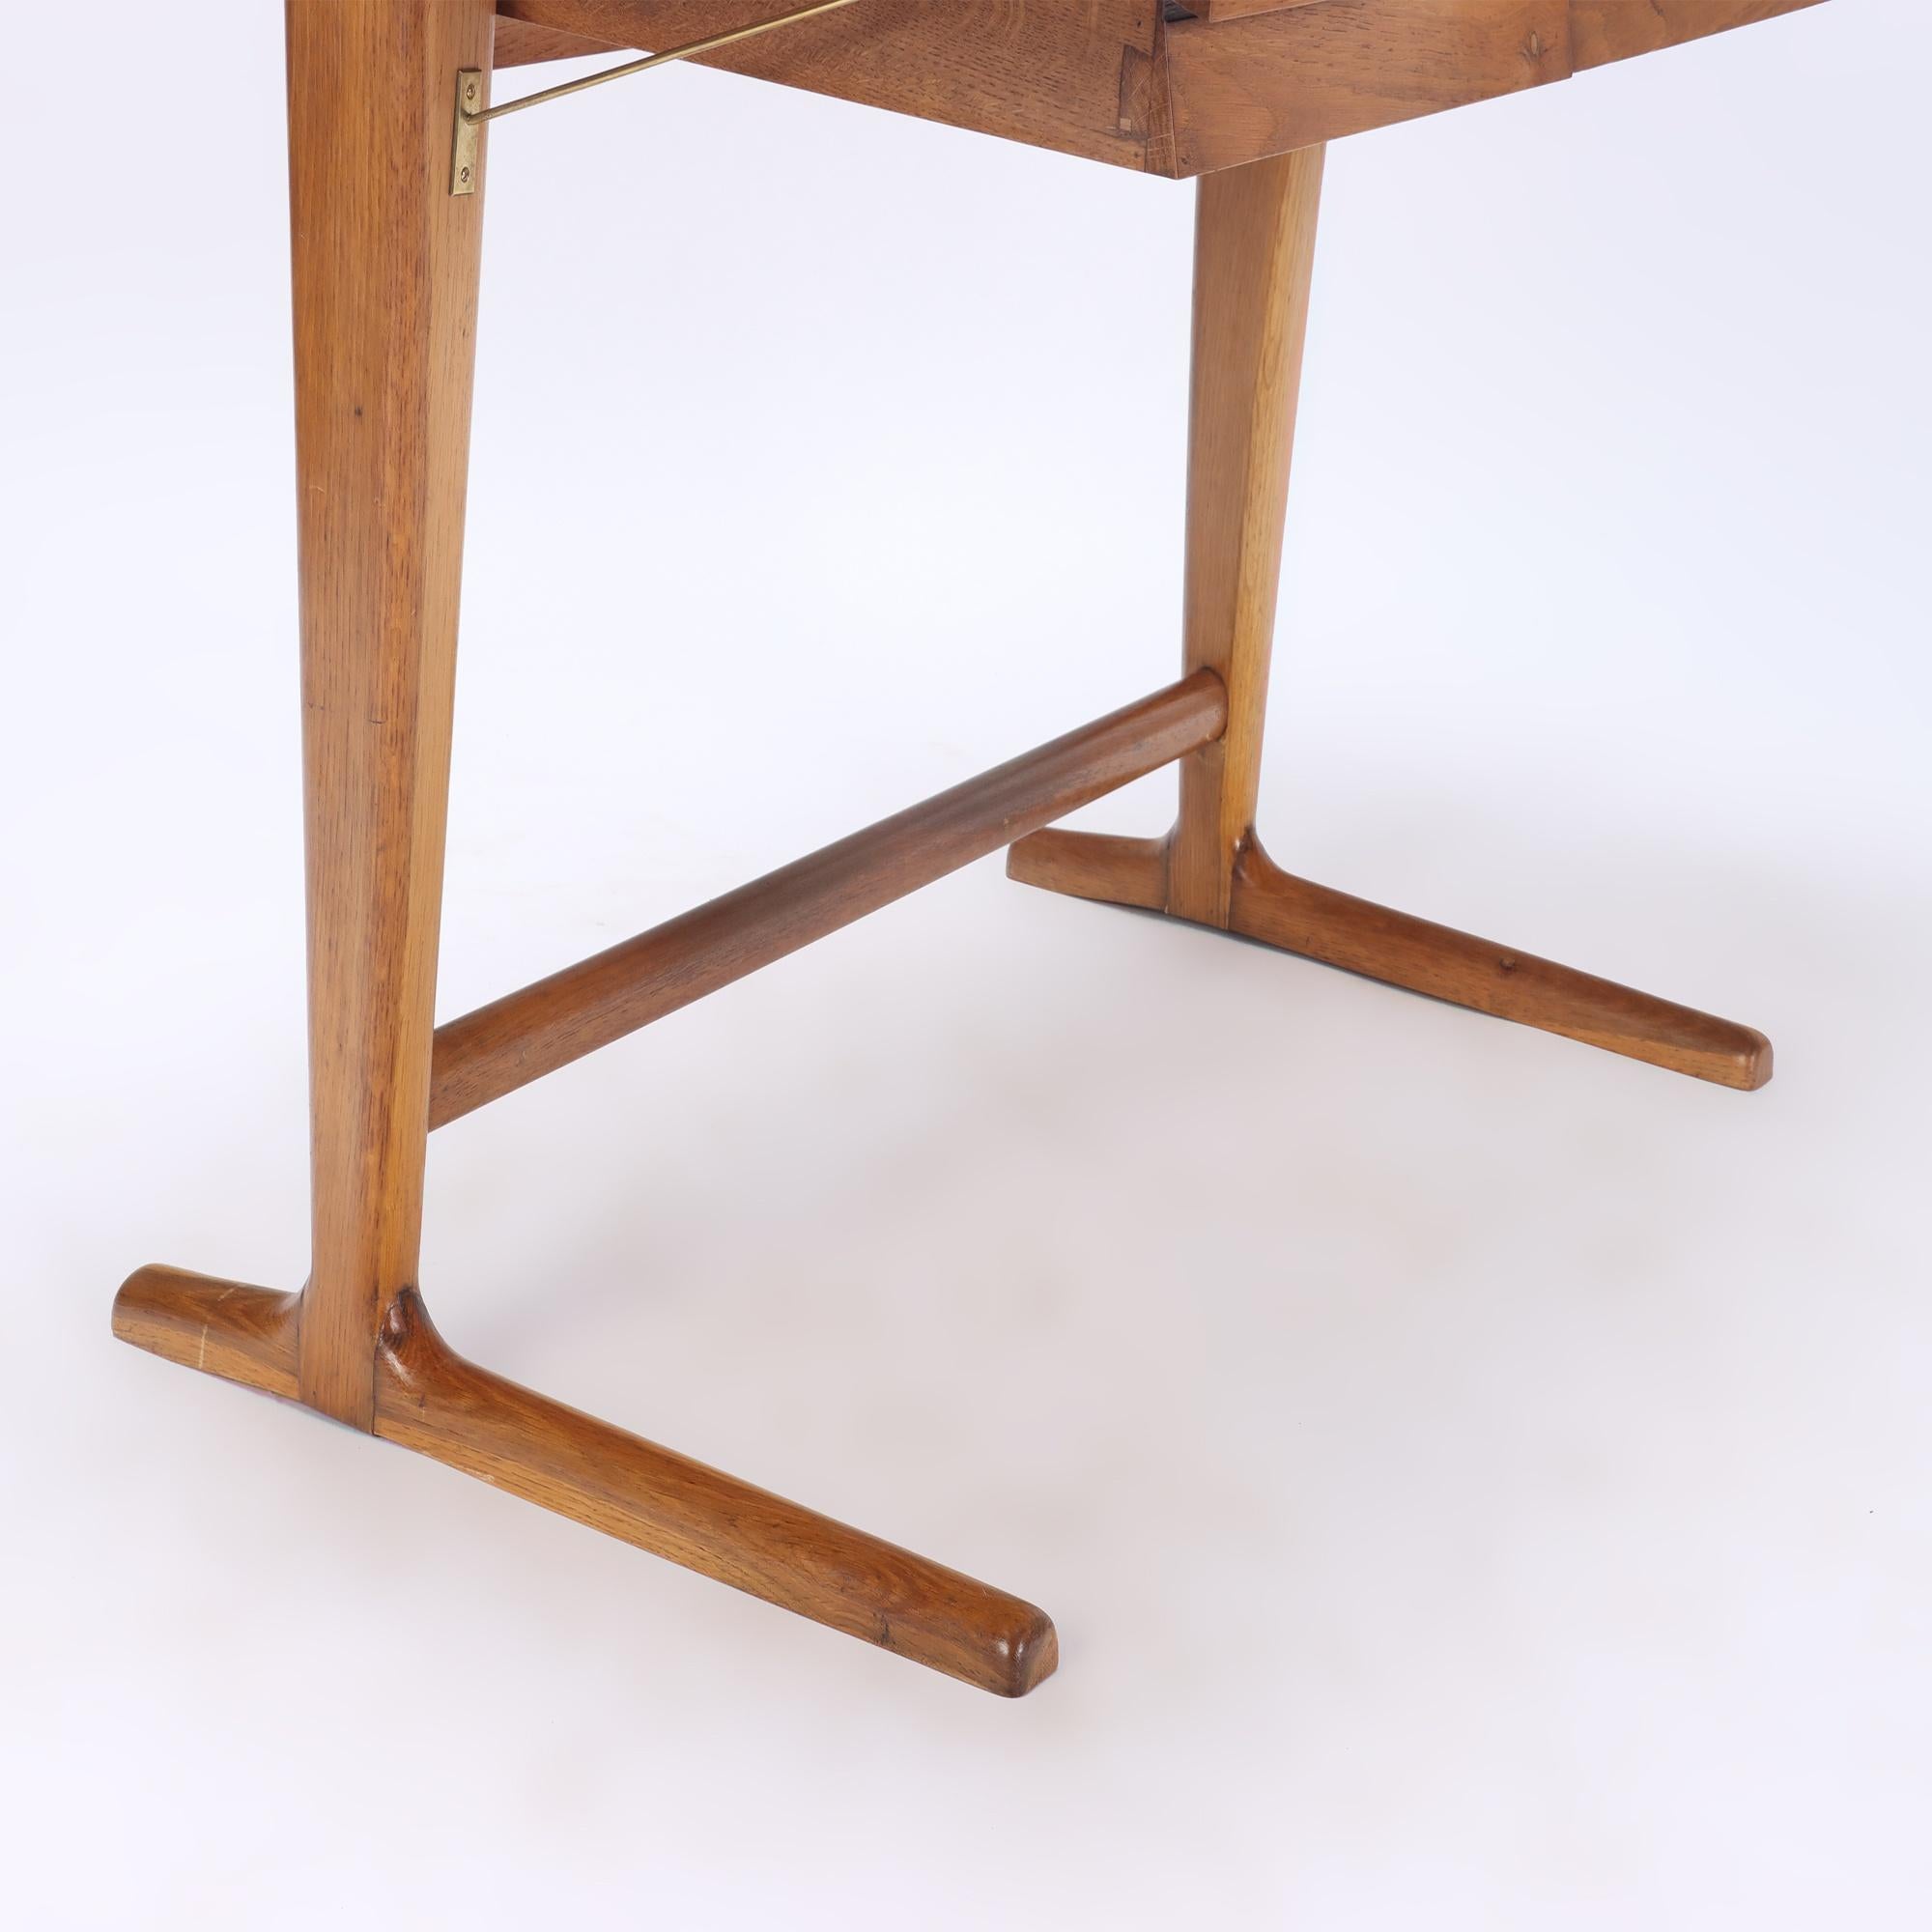 An Italian Architect's desk made with a slant, supported by an oak base and with a black glass top, circa 1960.